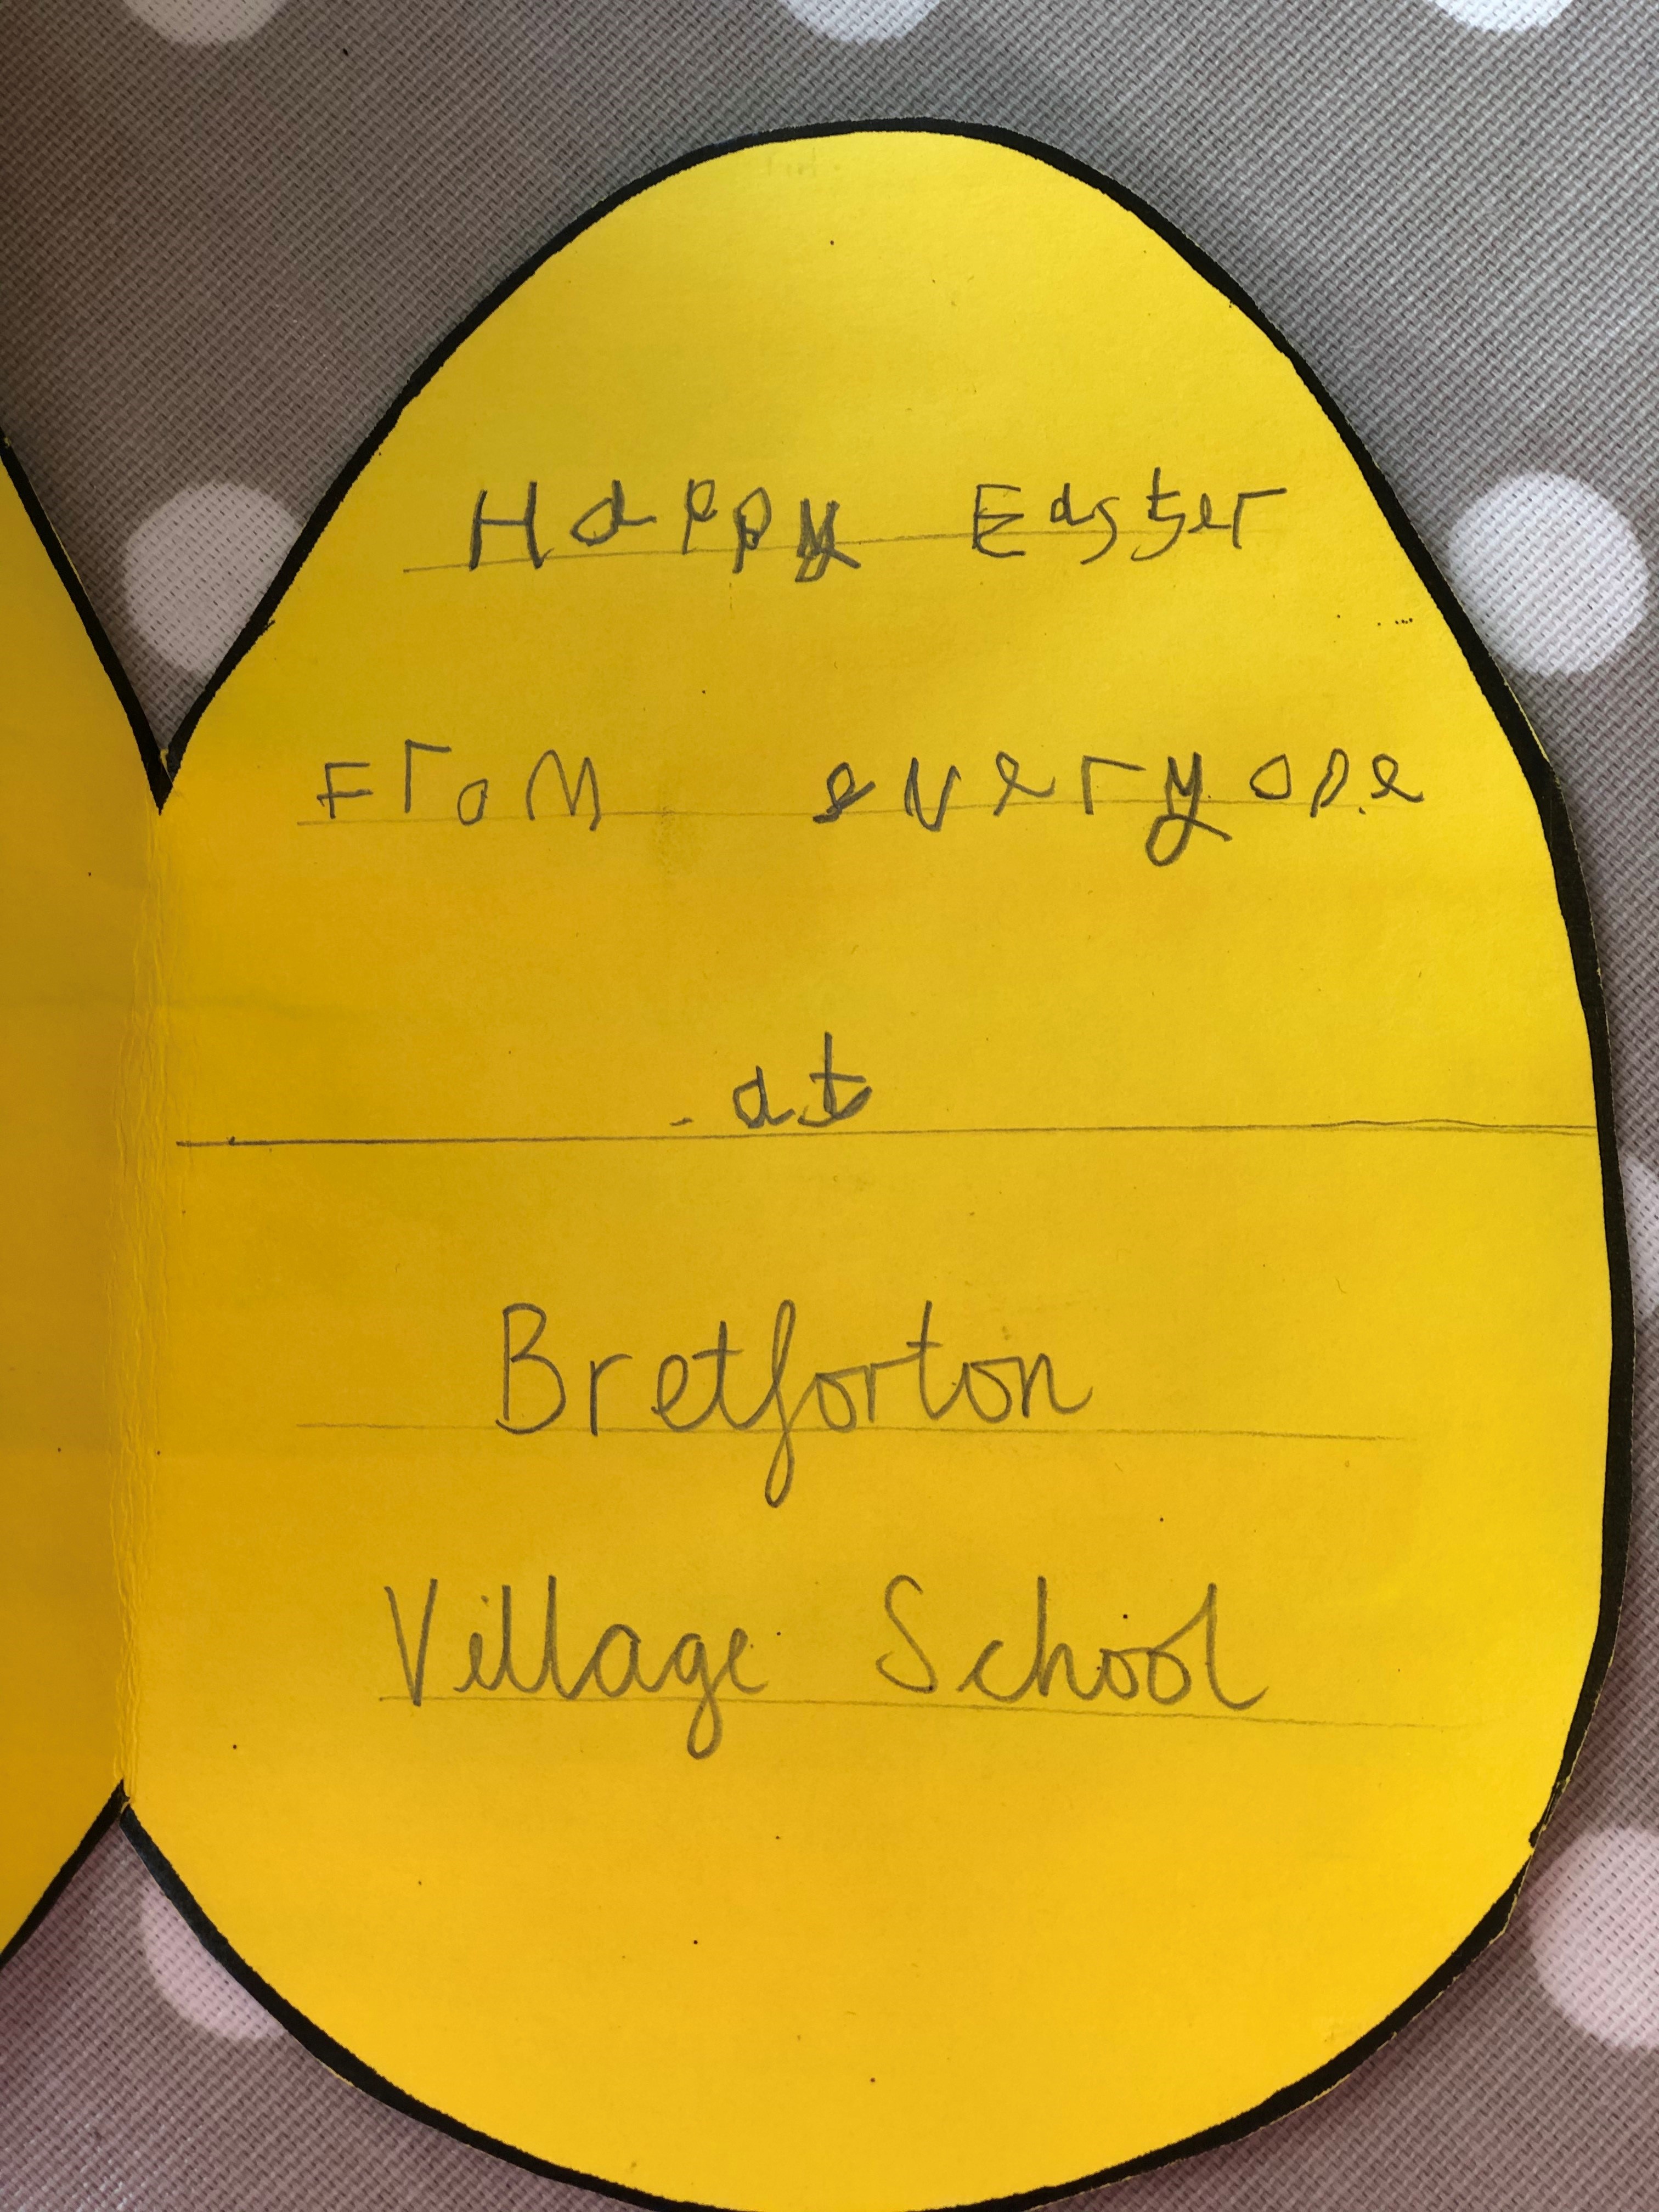 Photo of the inside of an egg-shaped yellow Easter card, saying "Happy Easter from everyone at Bretforton Village School"